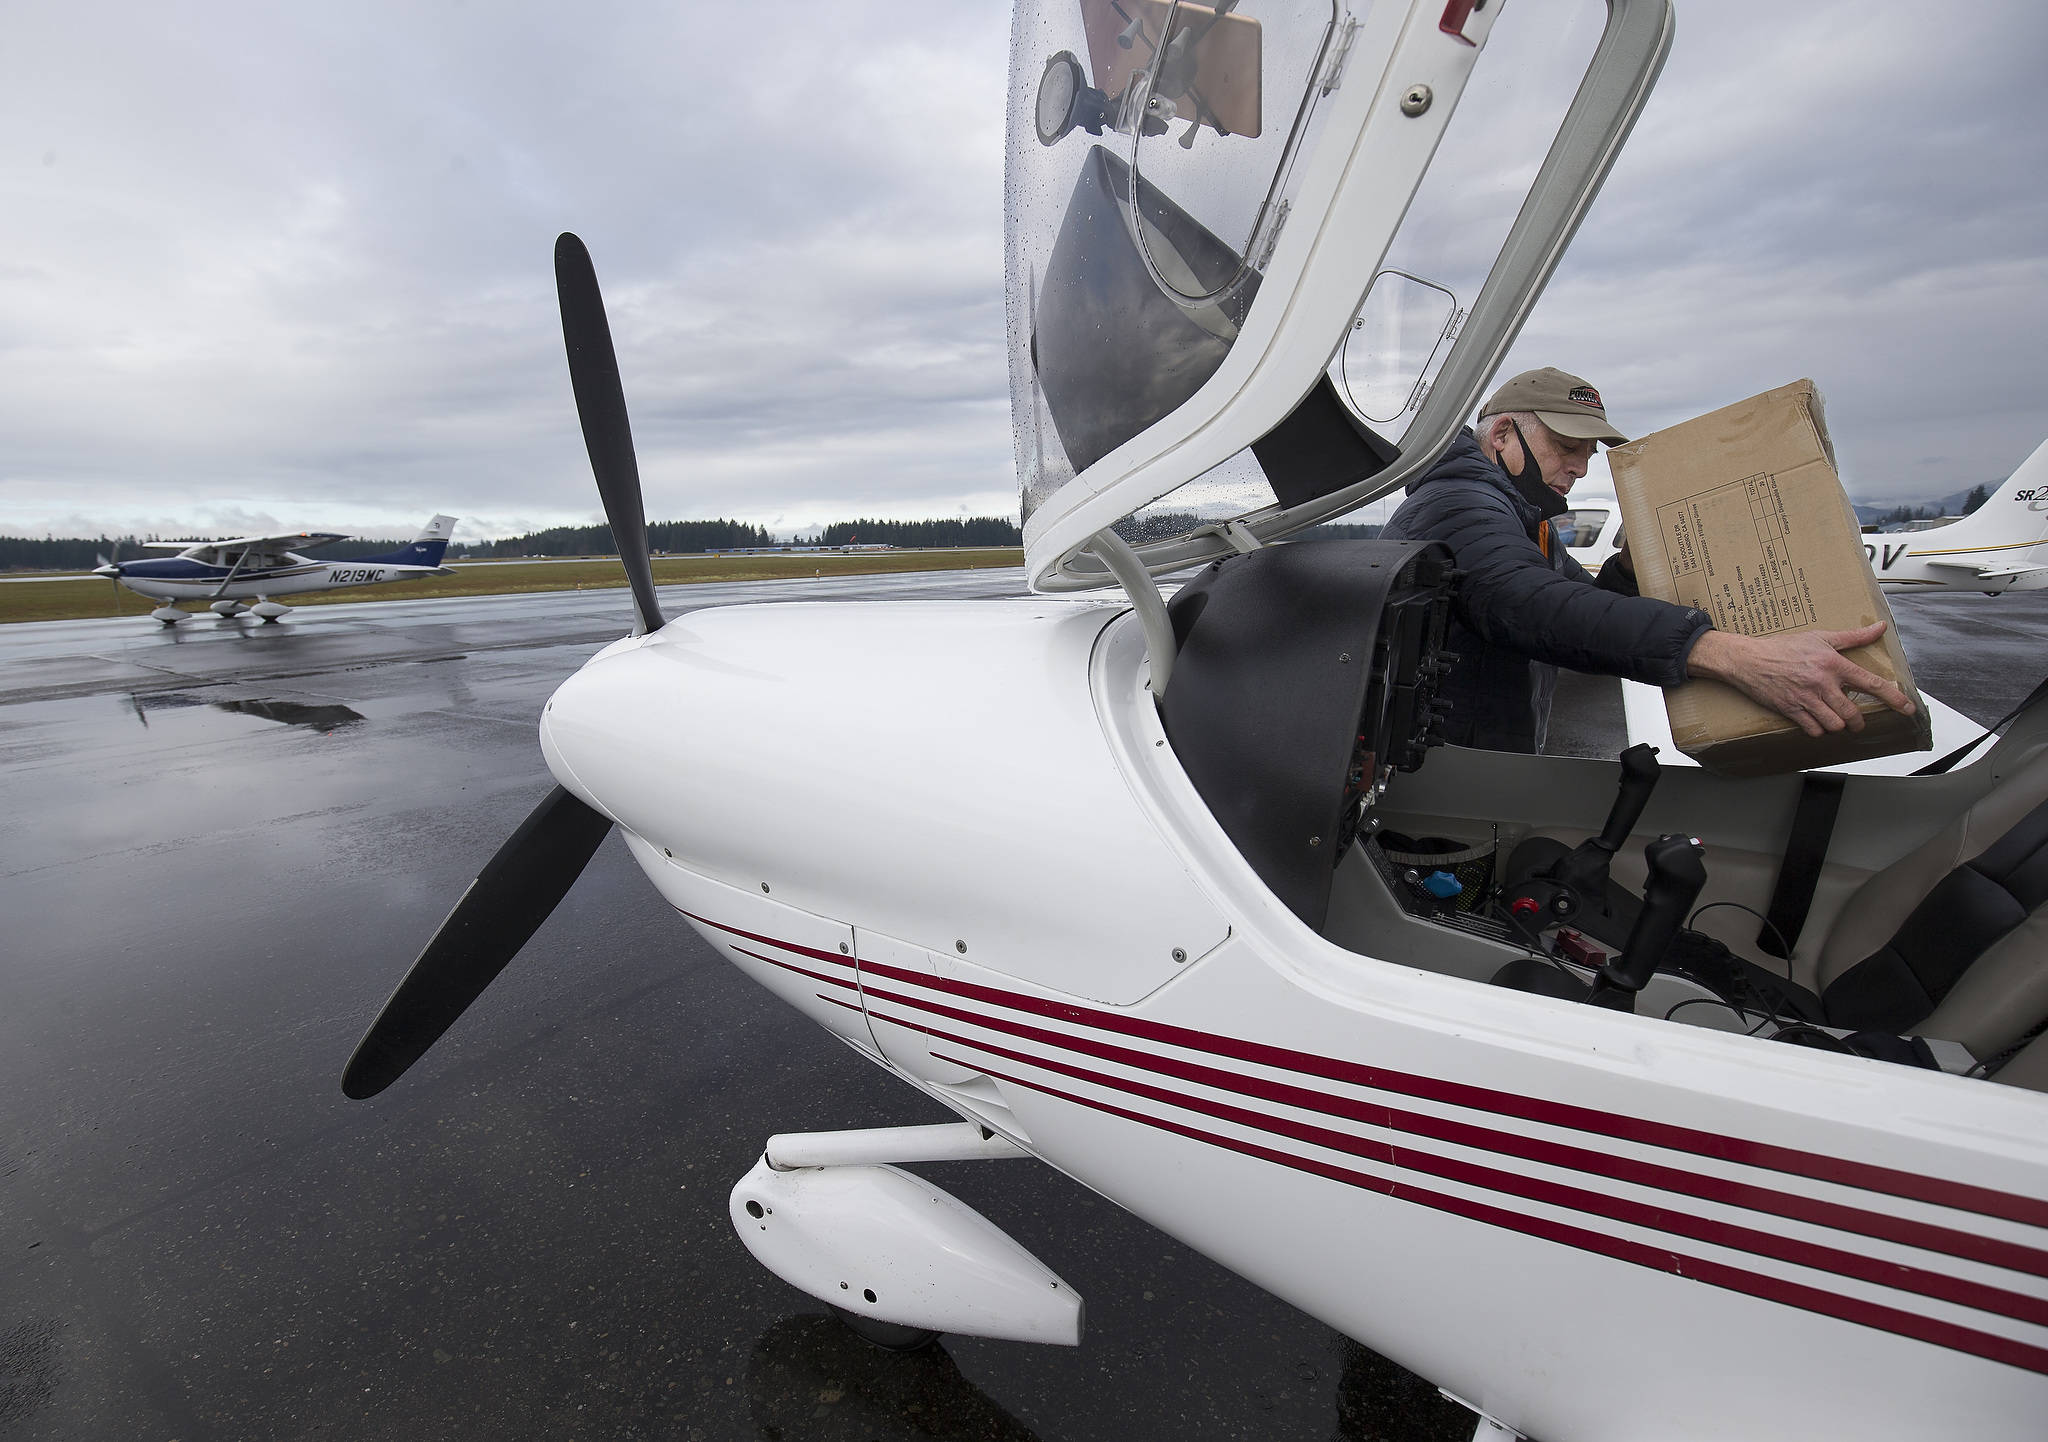 Pilot Greg Bell places a box into the passenger seat of his Diamond DA-40 plane as he prepares to airlift PPE supplies to Darrington from Arlington Municipal Airport on Thursday. (Andy Bronson / The Herald)